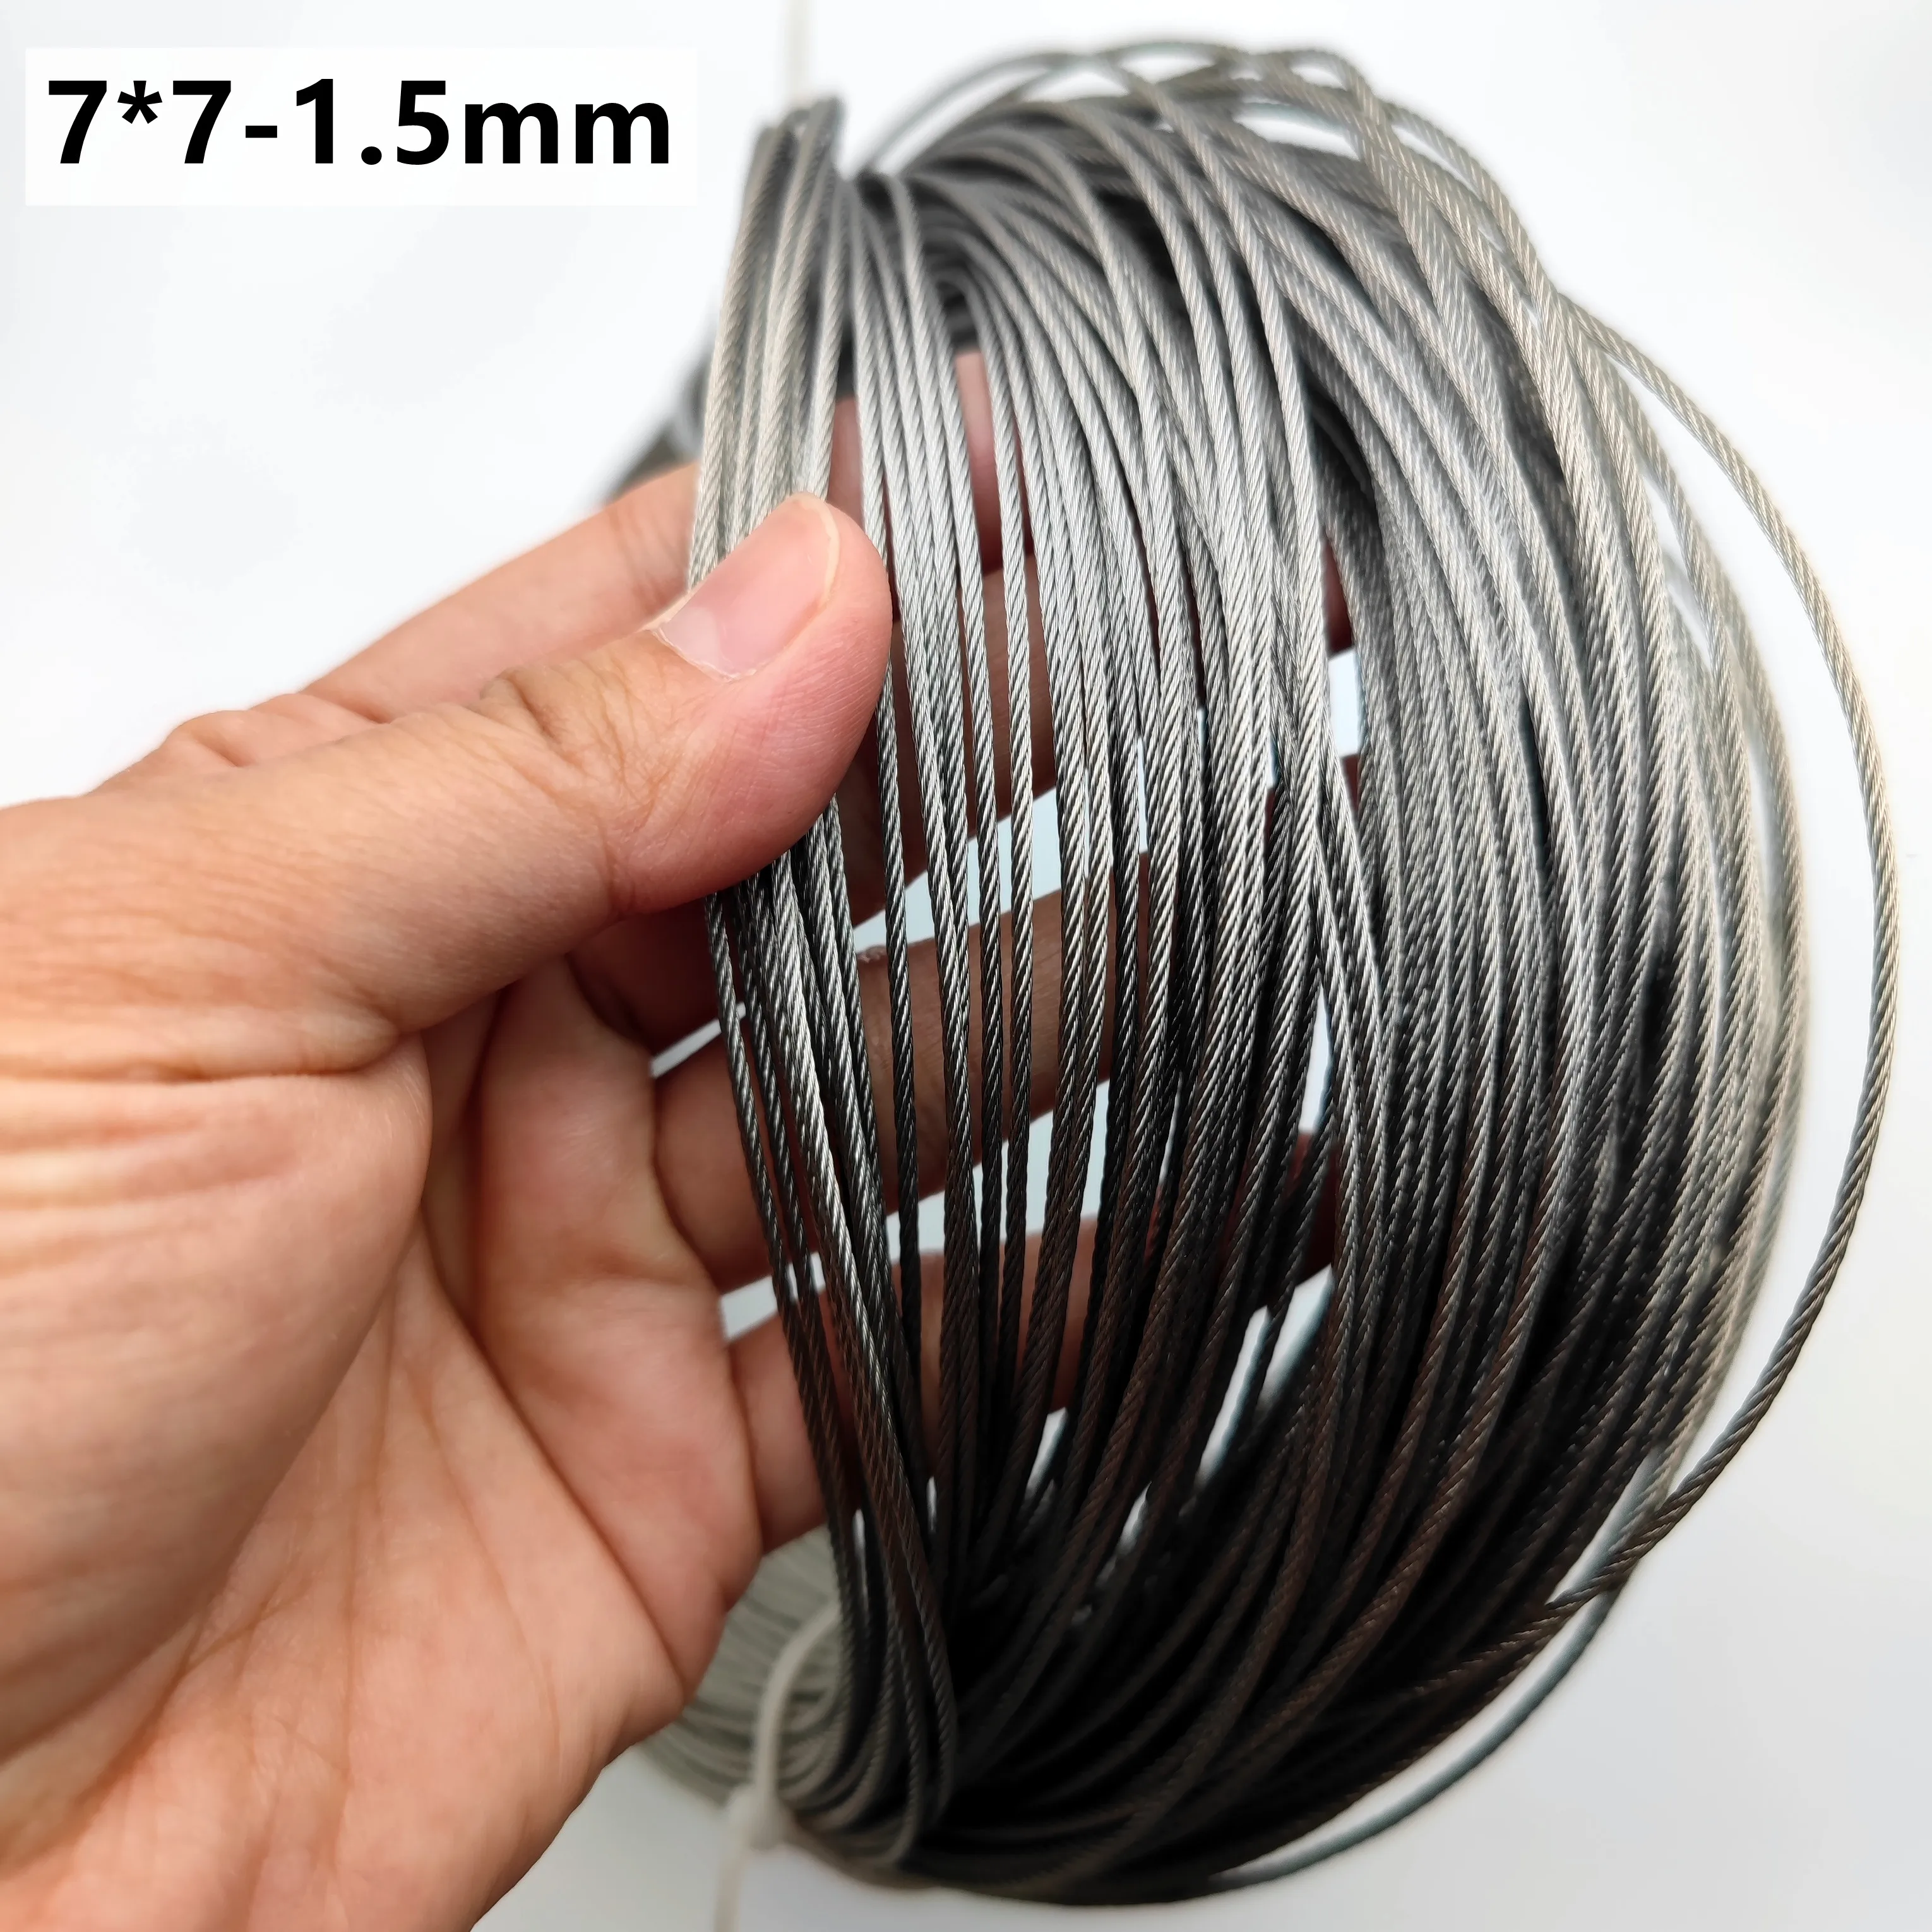 50M/100M/200M 1.5mm Diameter 7X7 Construction 304 Stainless steel Wire rope Alambre Softer Fishing Lifting Cable 50m 100m 1 2mm diameter 7x7 construction 304 stainless steel wire rope alambre softer fishing lifting cable